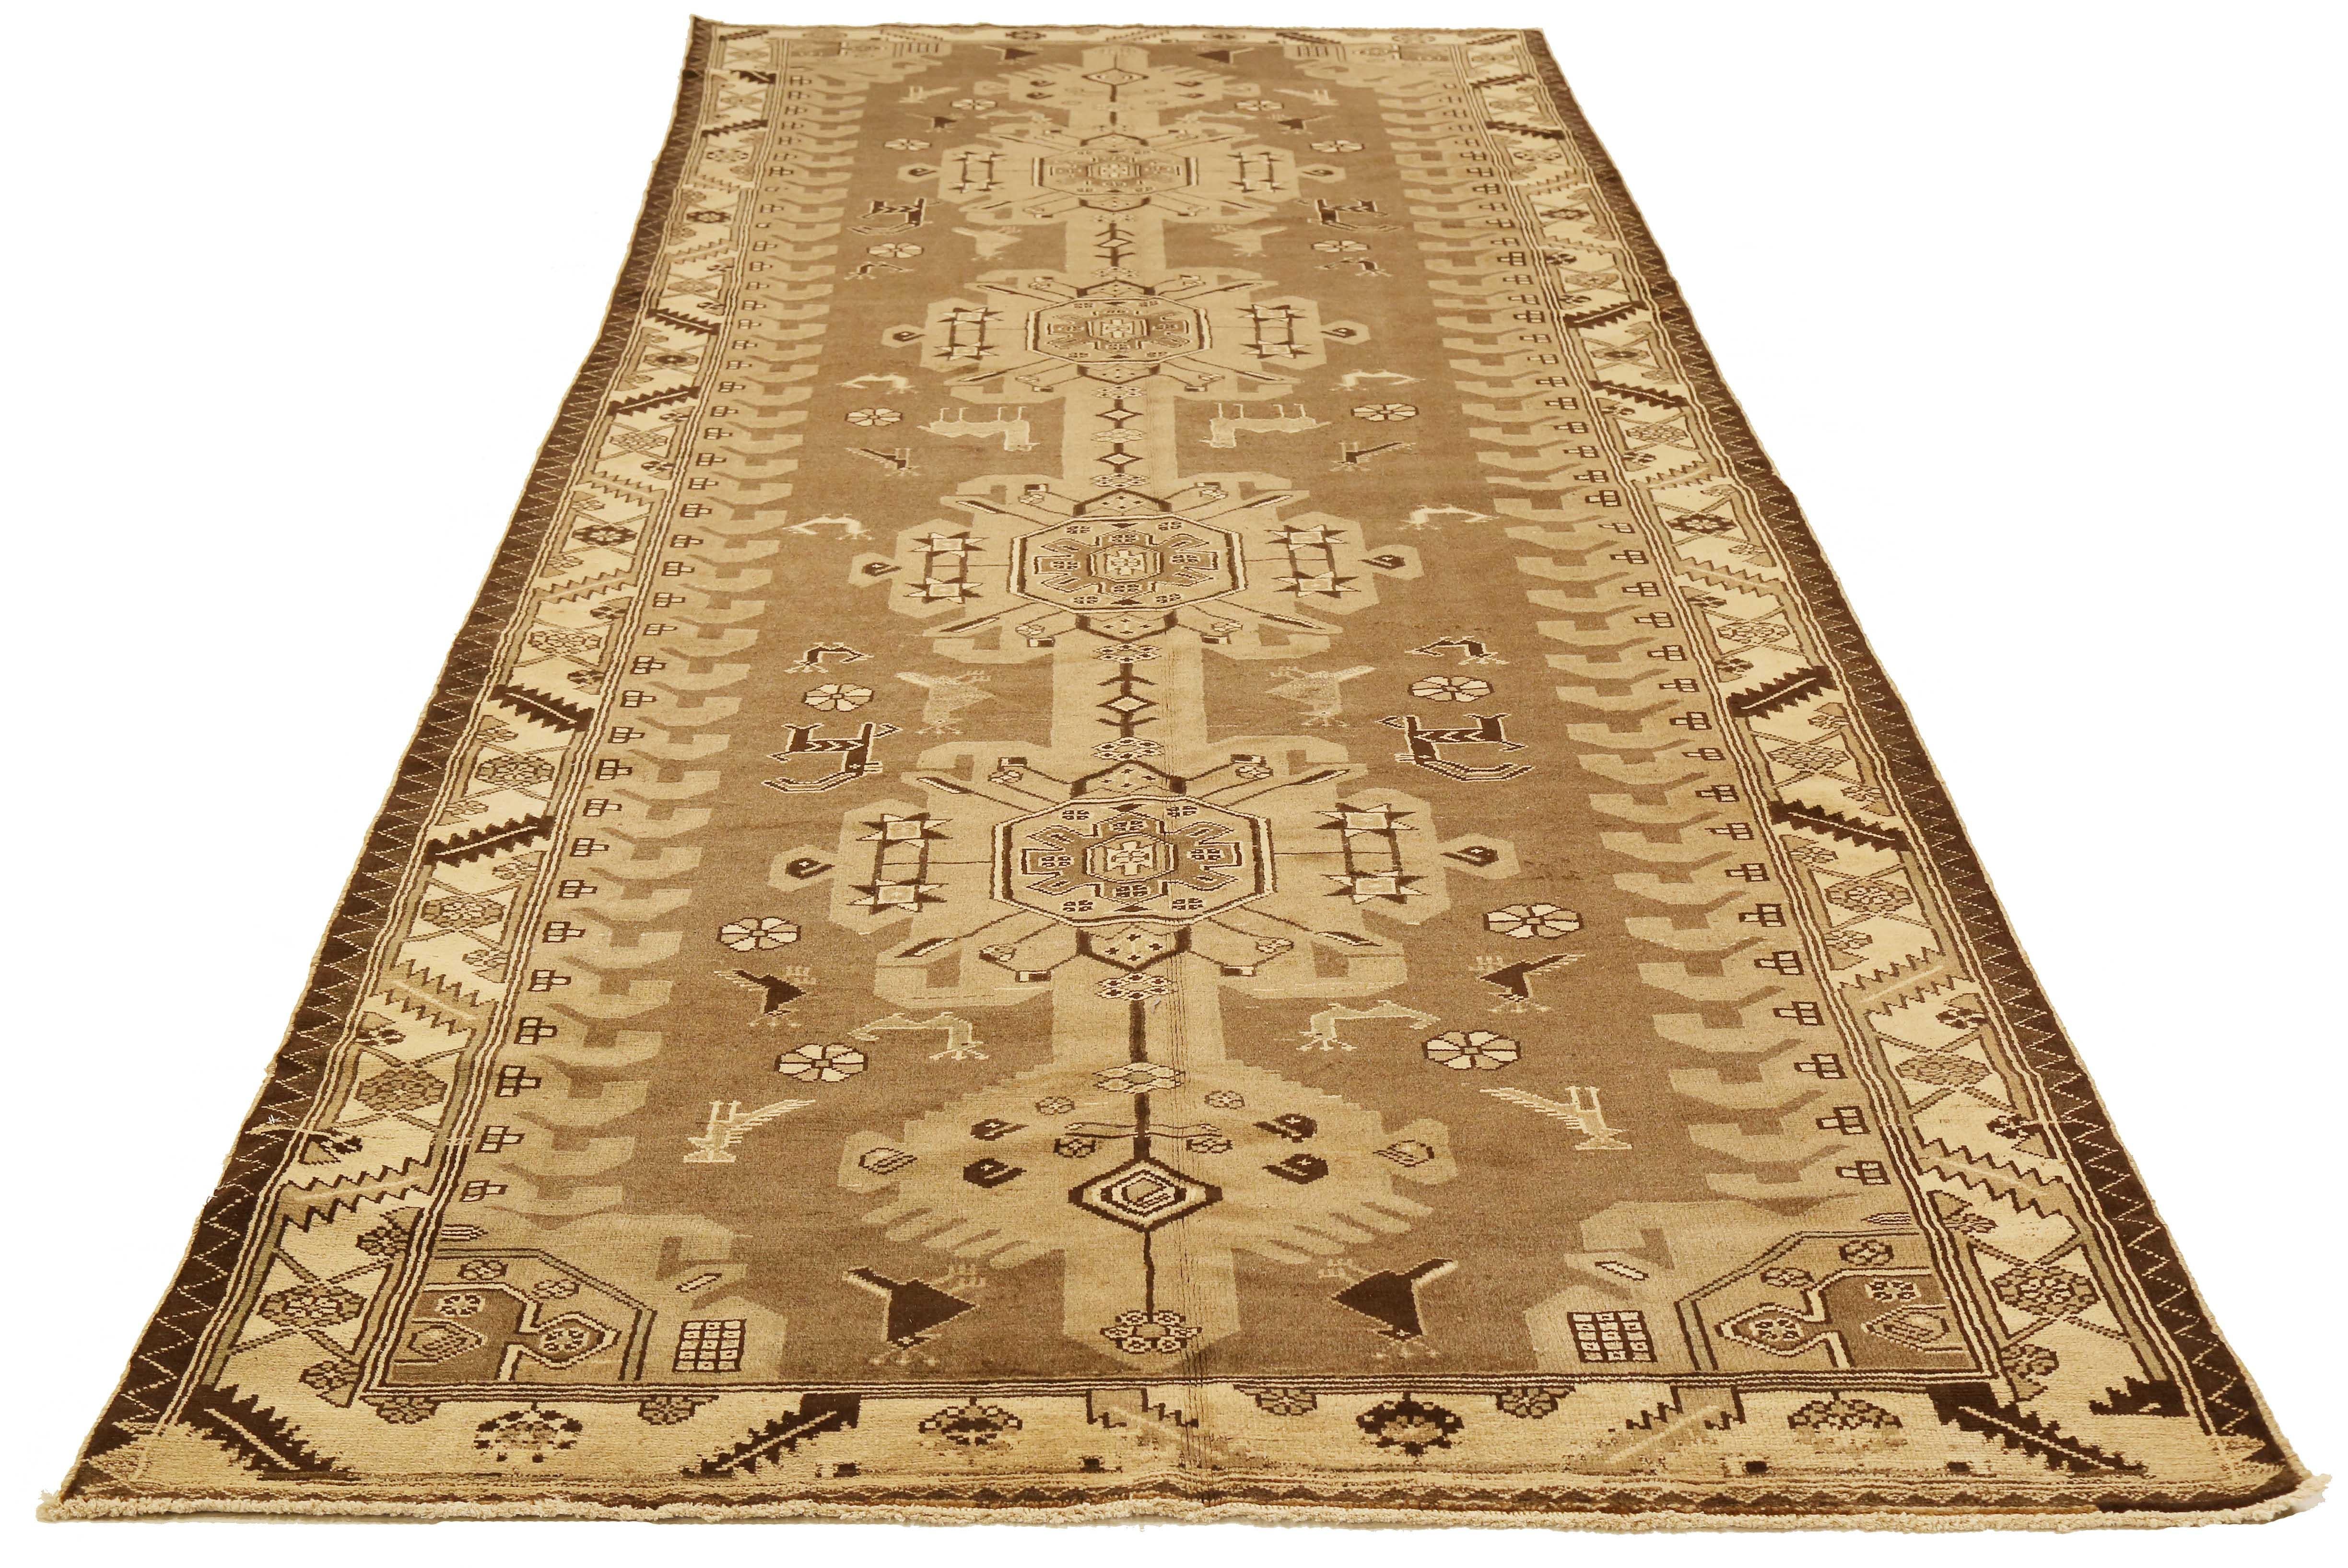 Antique Persian rug handwoven from the finest sheep’s wool and colored with all-natural vegetable dyes that are safe for humans and pets. It’s a traditional Shahsavan design highlighted by geometric medallions on the centerfield. It’s a beautiful